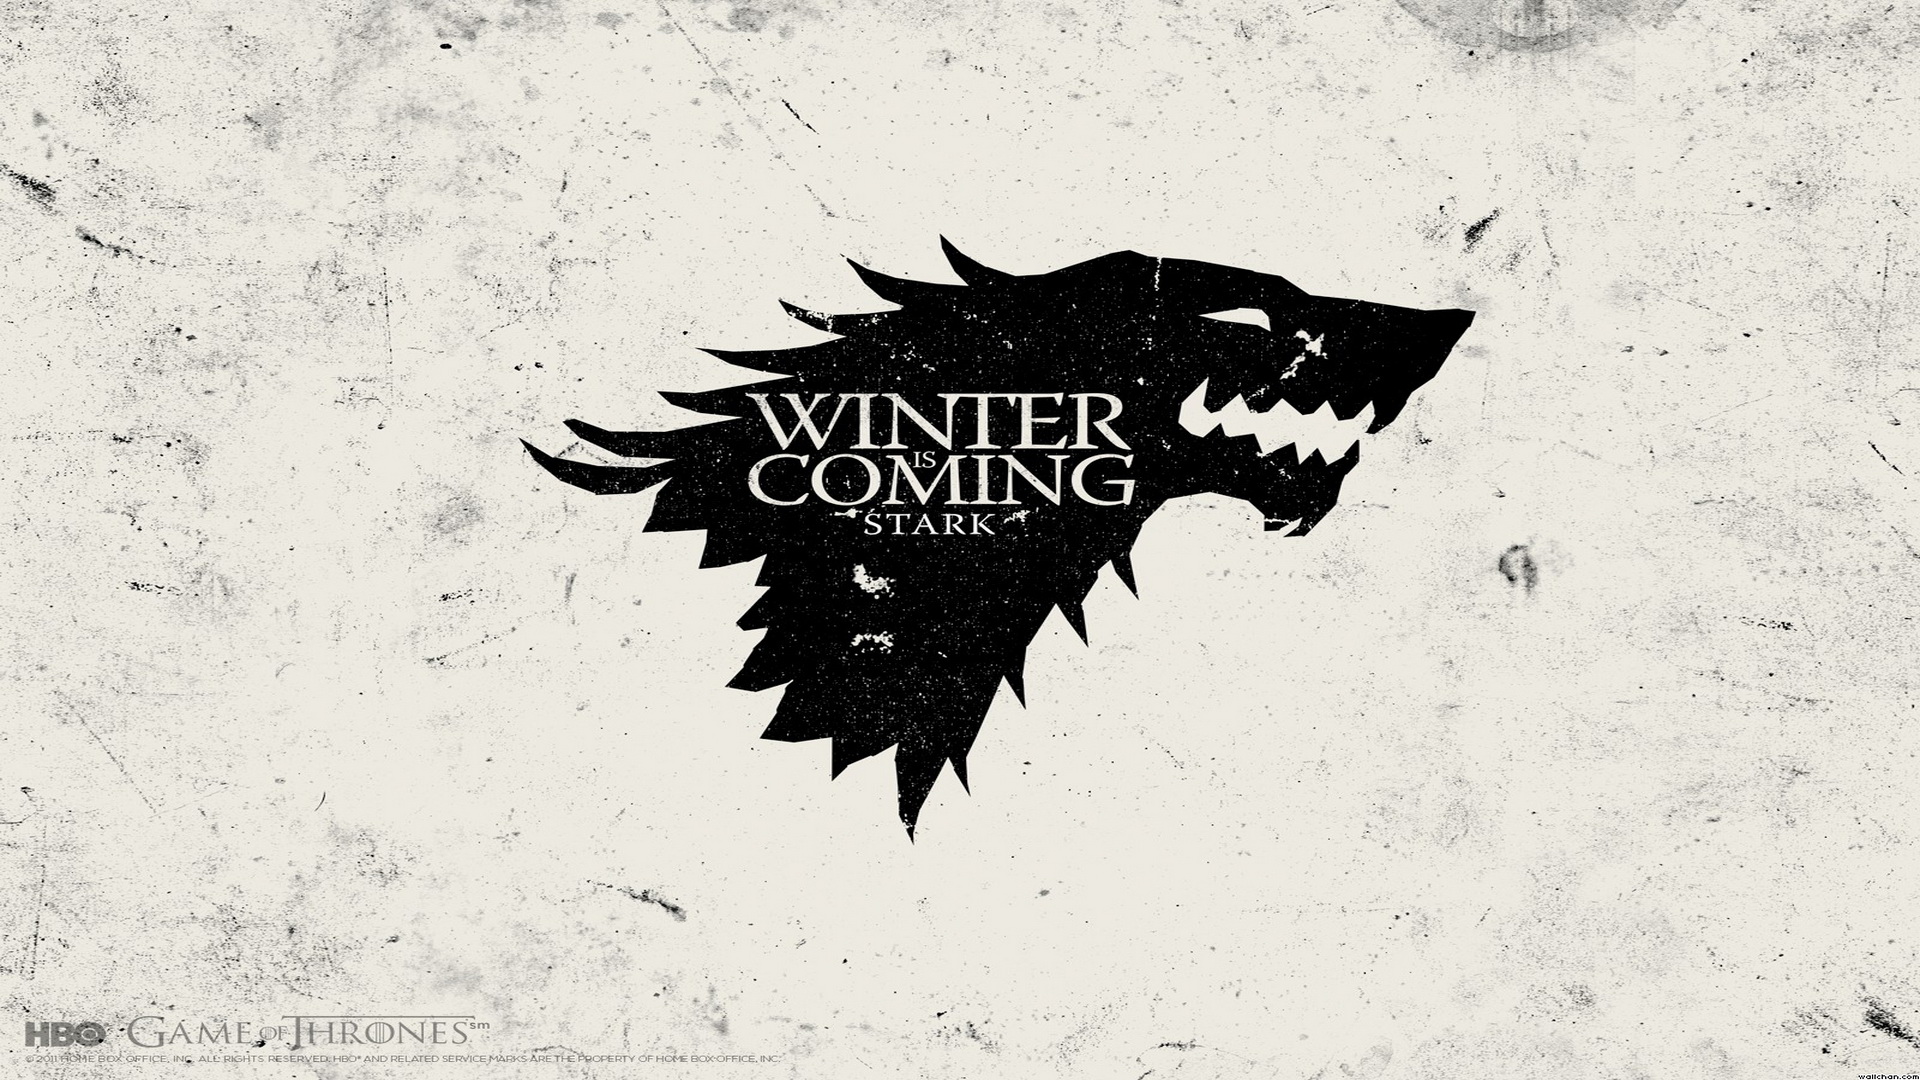 HD Wallpapers Backgrounds game of thrones winter is coming stark 1920x1080